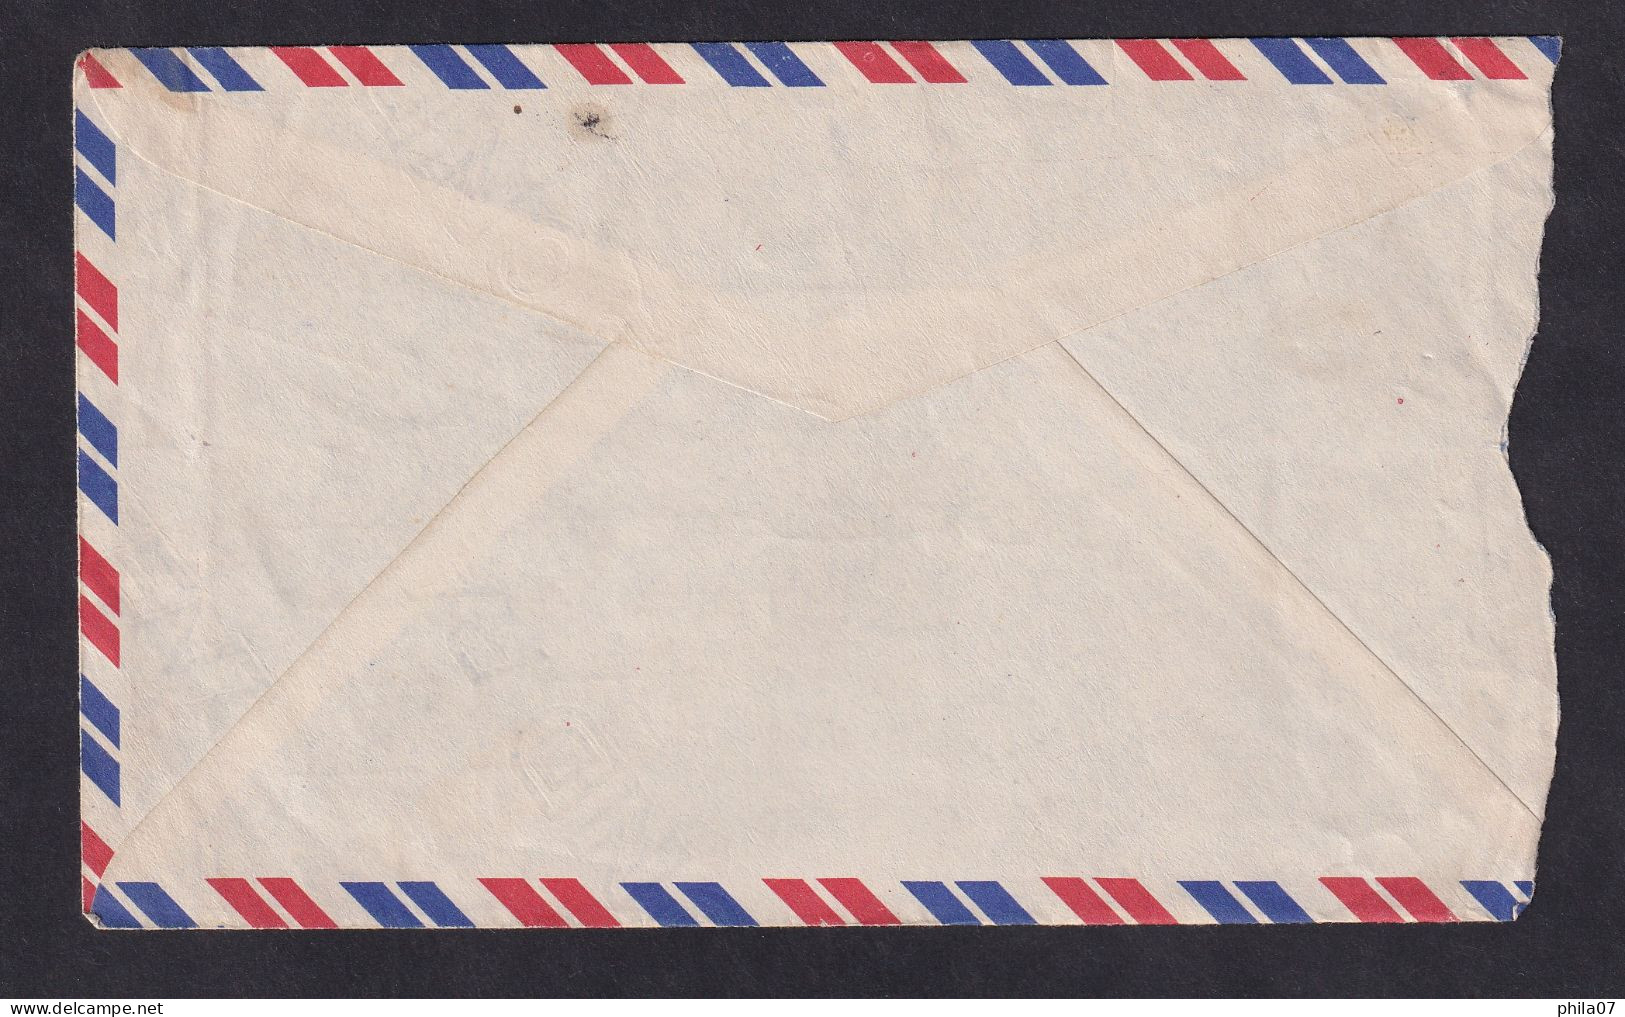 NEPAL - Envelope Sent From Nepal, Additional Franked With Two Stamp / 2 Scans - Népal